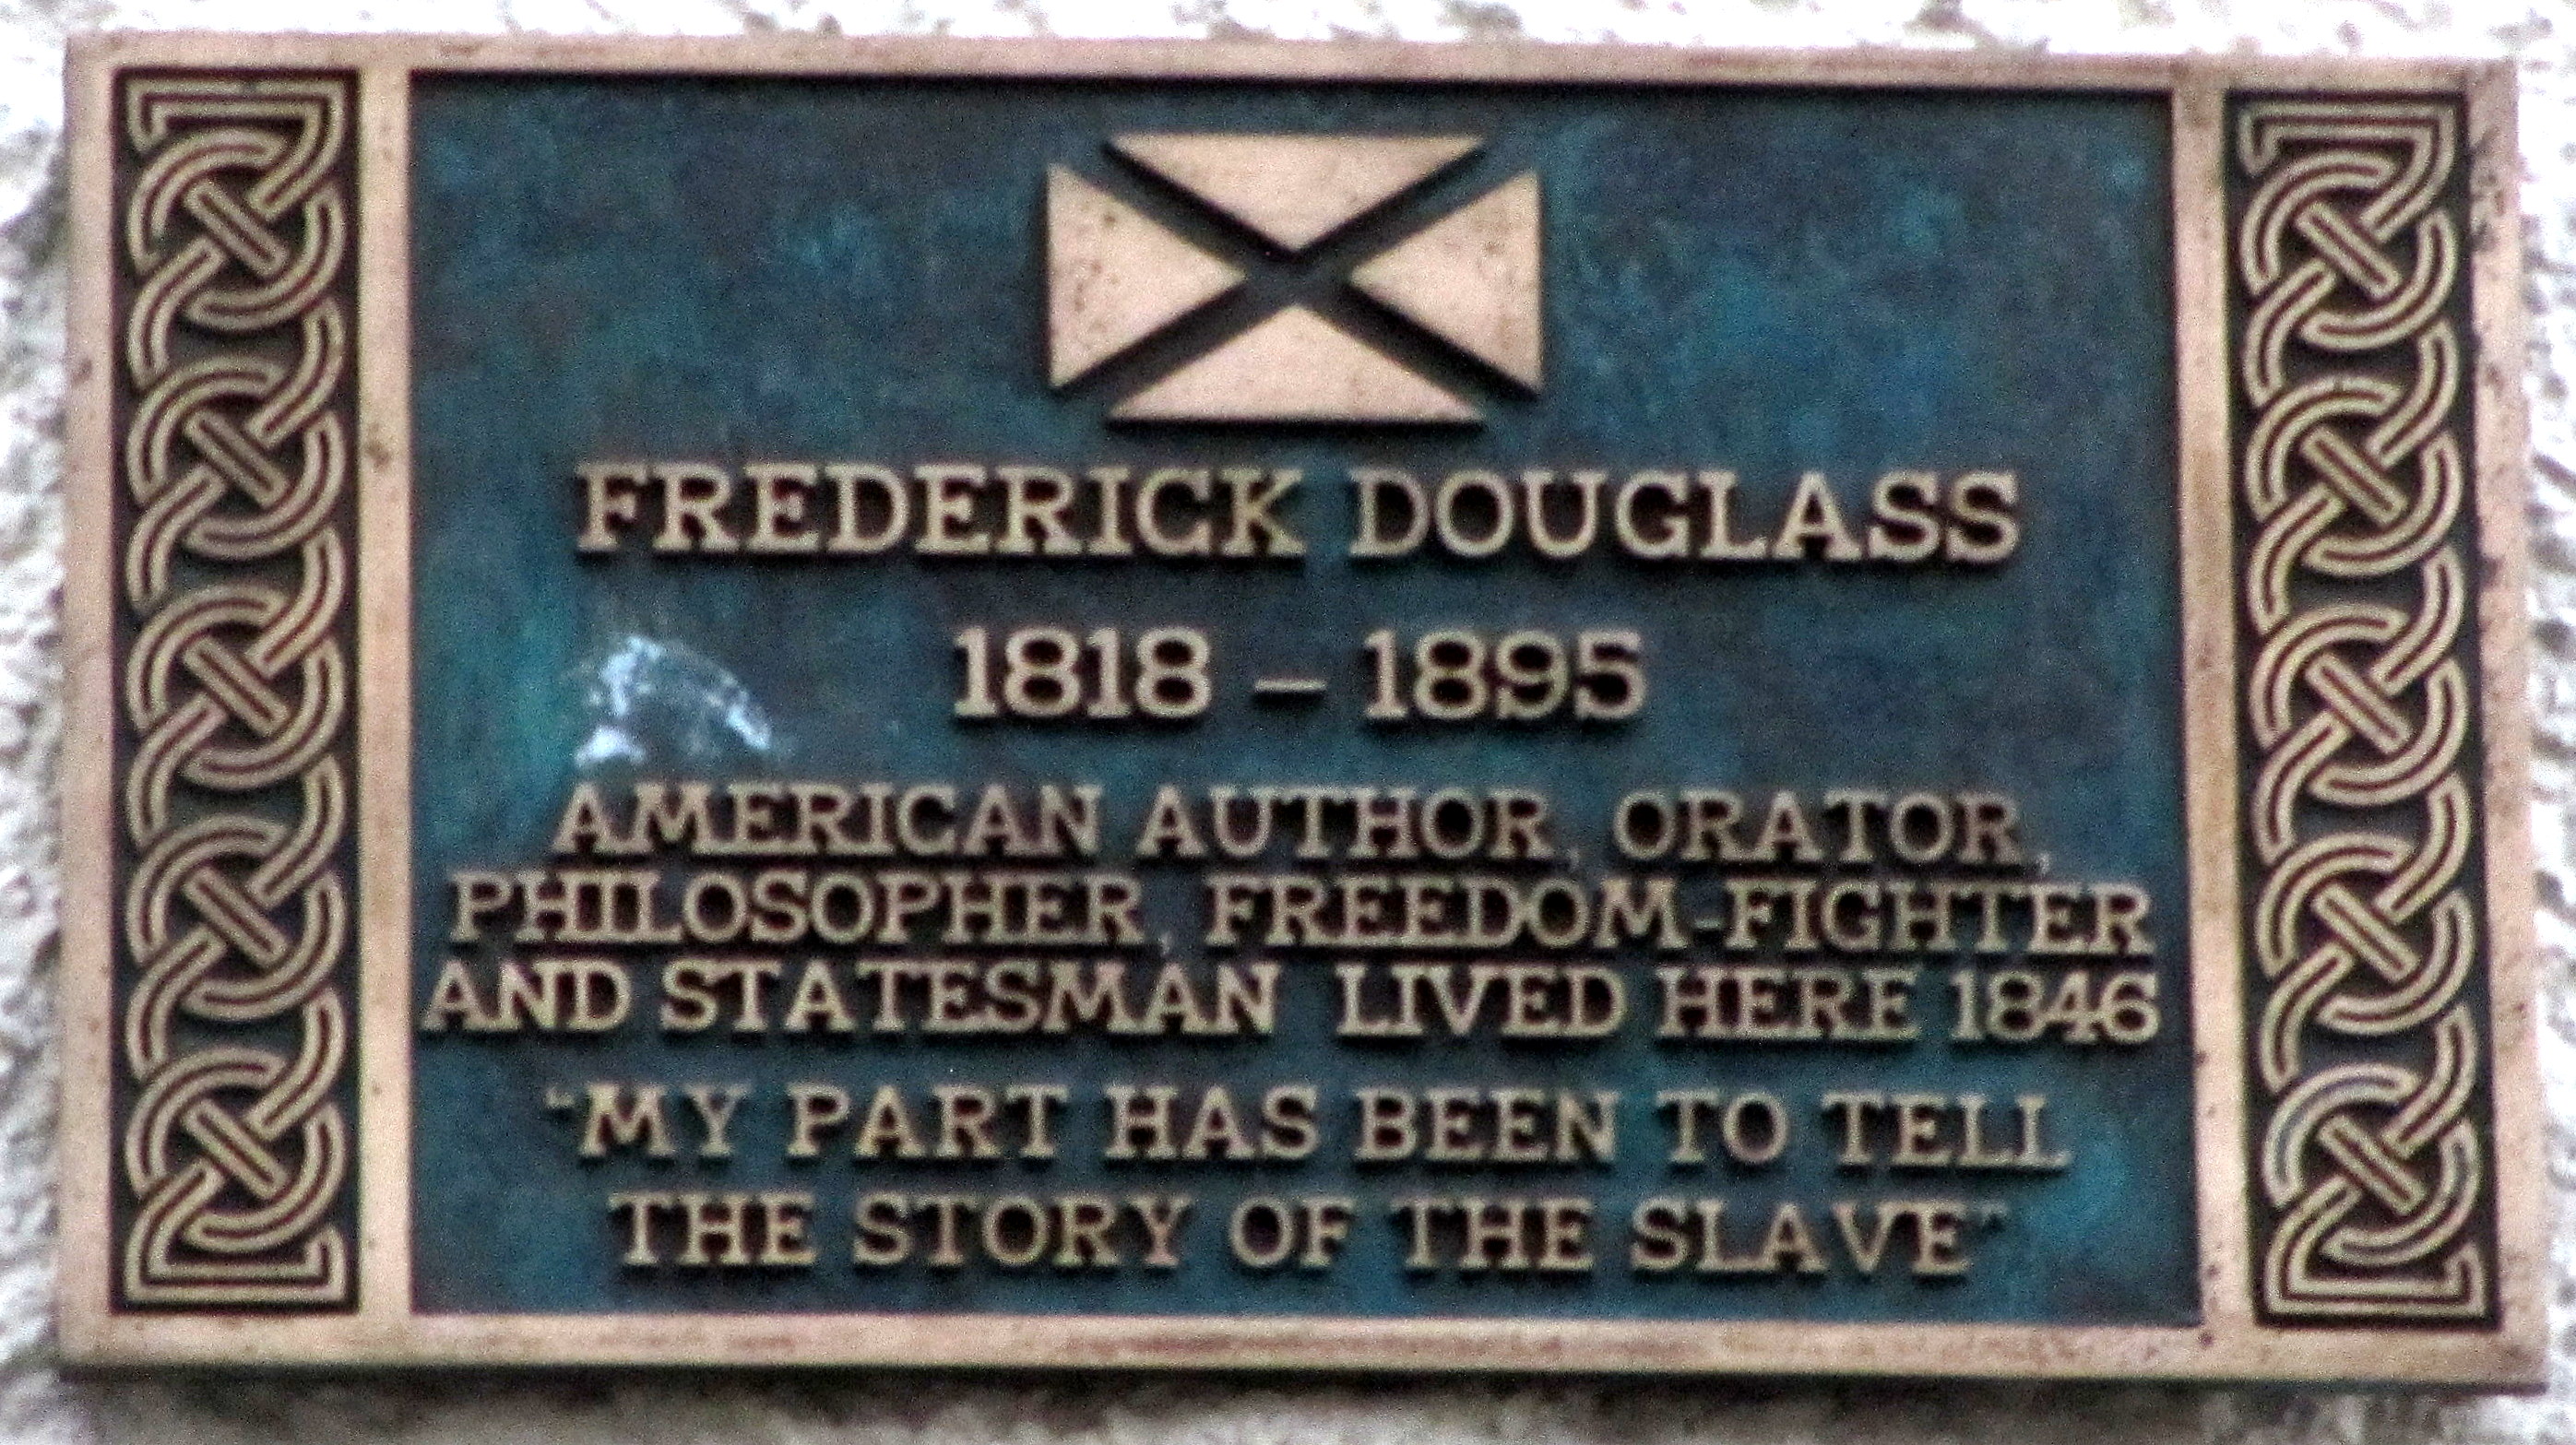 Plaque marking the place Frederick Douglass stayed in Edinburgh